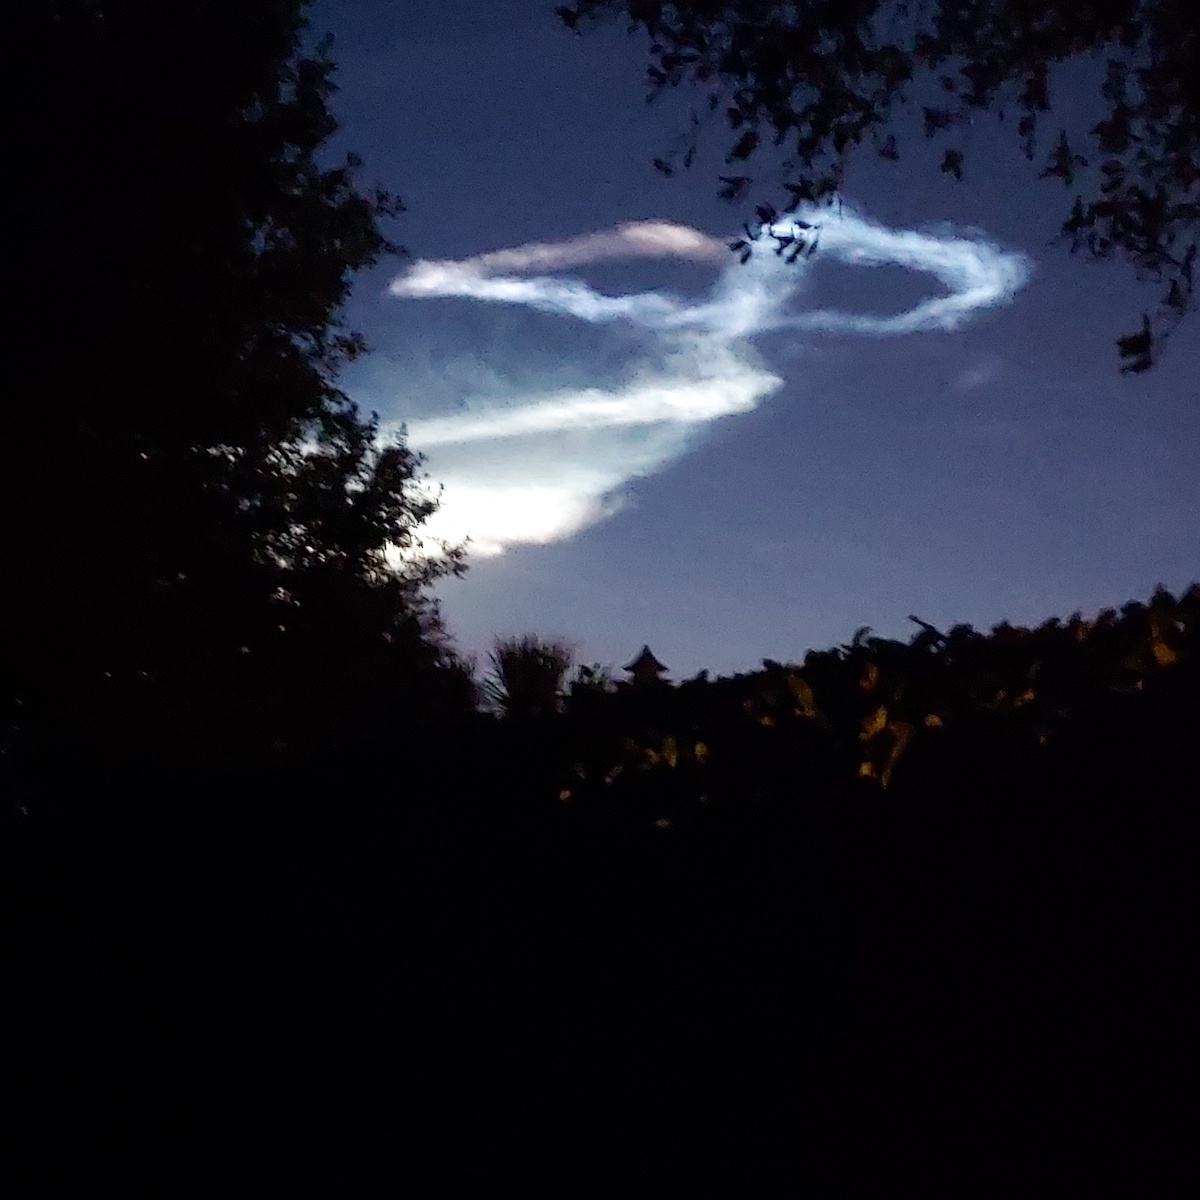 SpaceX Launch Contrails Over The Villages